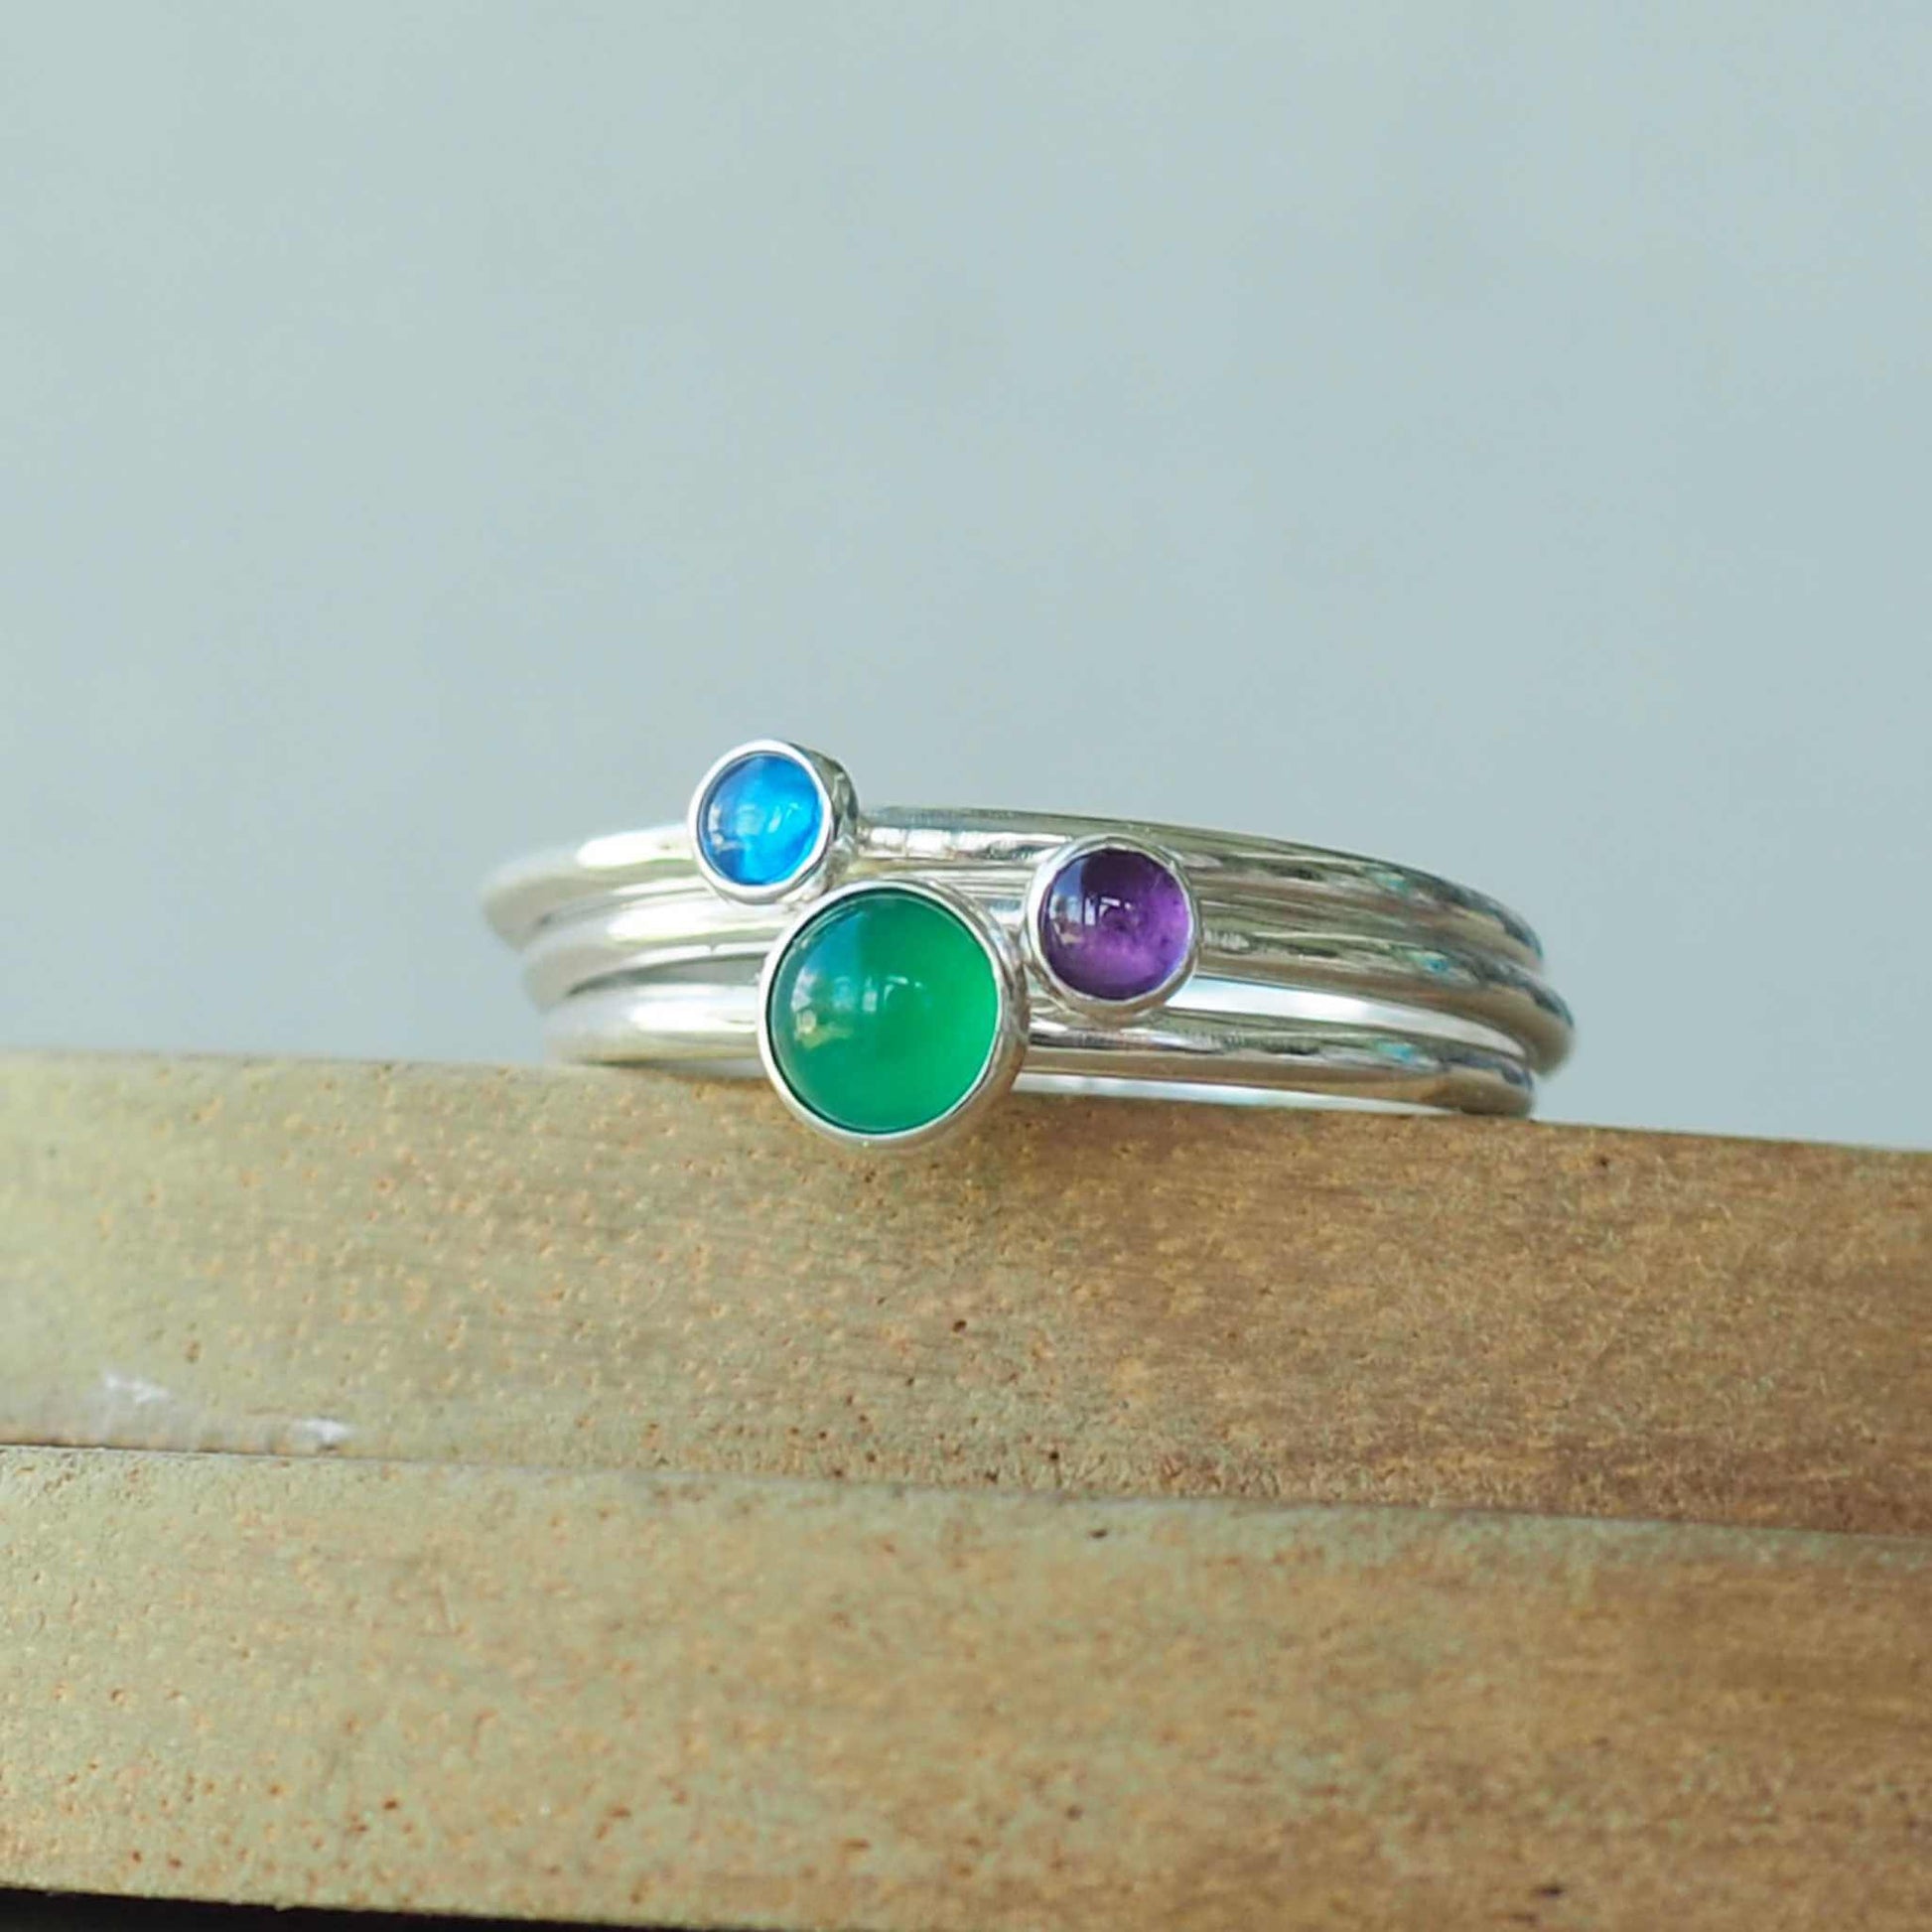 Three Birthstone Ring set made from Sterling Silver, with a 5mm round Green Agate Birthstone for May, and two smaller 3mm gemstones in Lab Sapphire for September and Amethyst for February. The gemstones colours are emerald green, purple and primary blue. Handmade in Scotland by Maram Jewellery